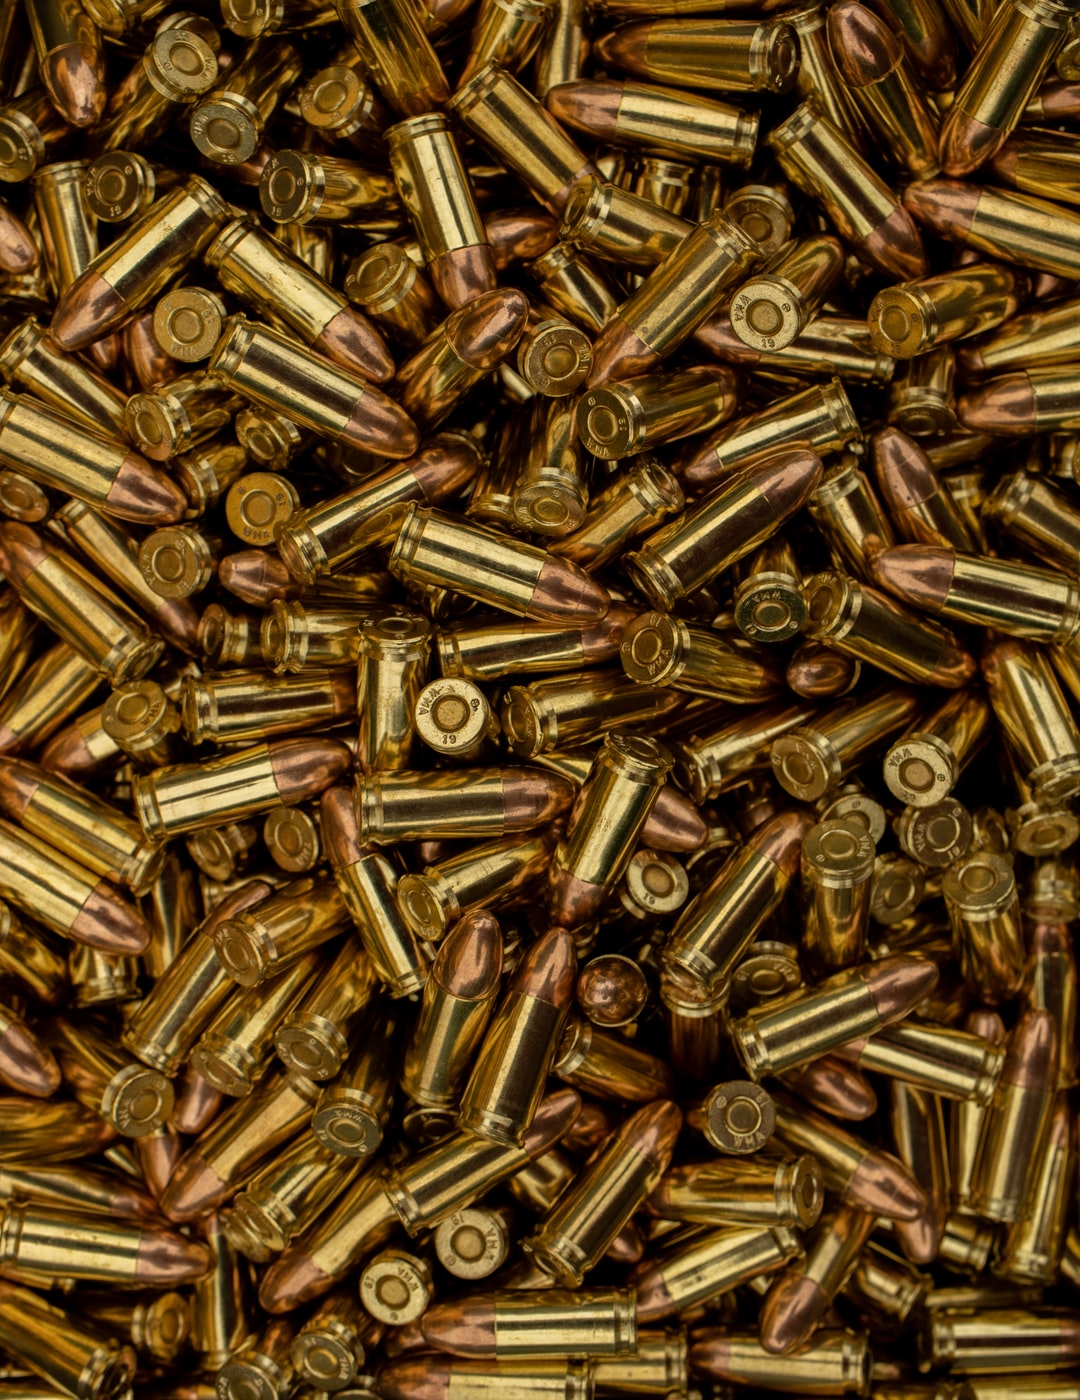 9 Cleaning Brass Reloading Royalty-Free Photos and Stock Images